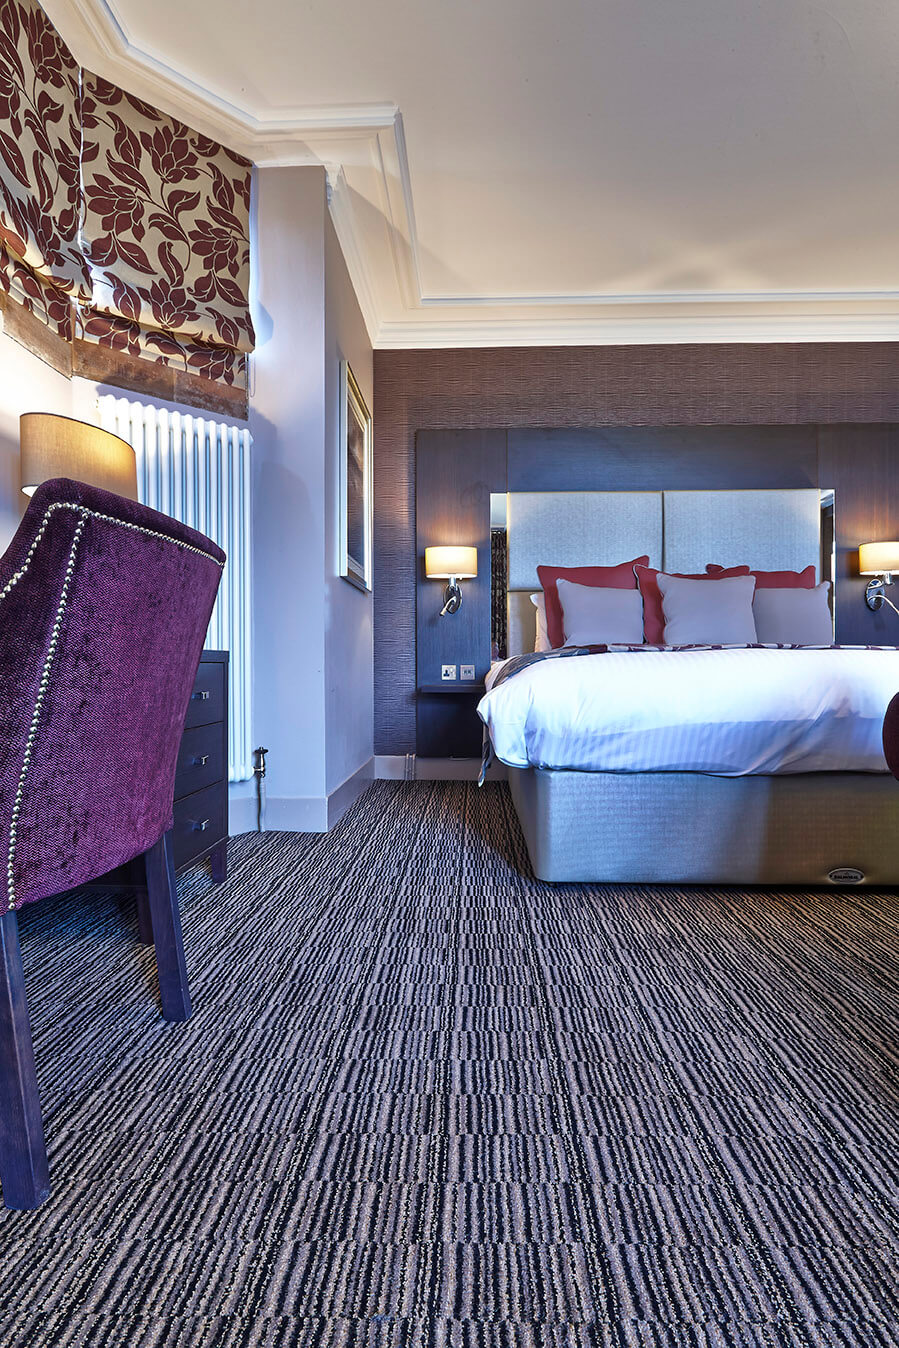 Abbey House Hotel bedroom, with a black, grey and cream striped design carpet, by Wilton Carpets